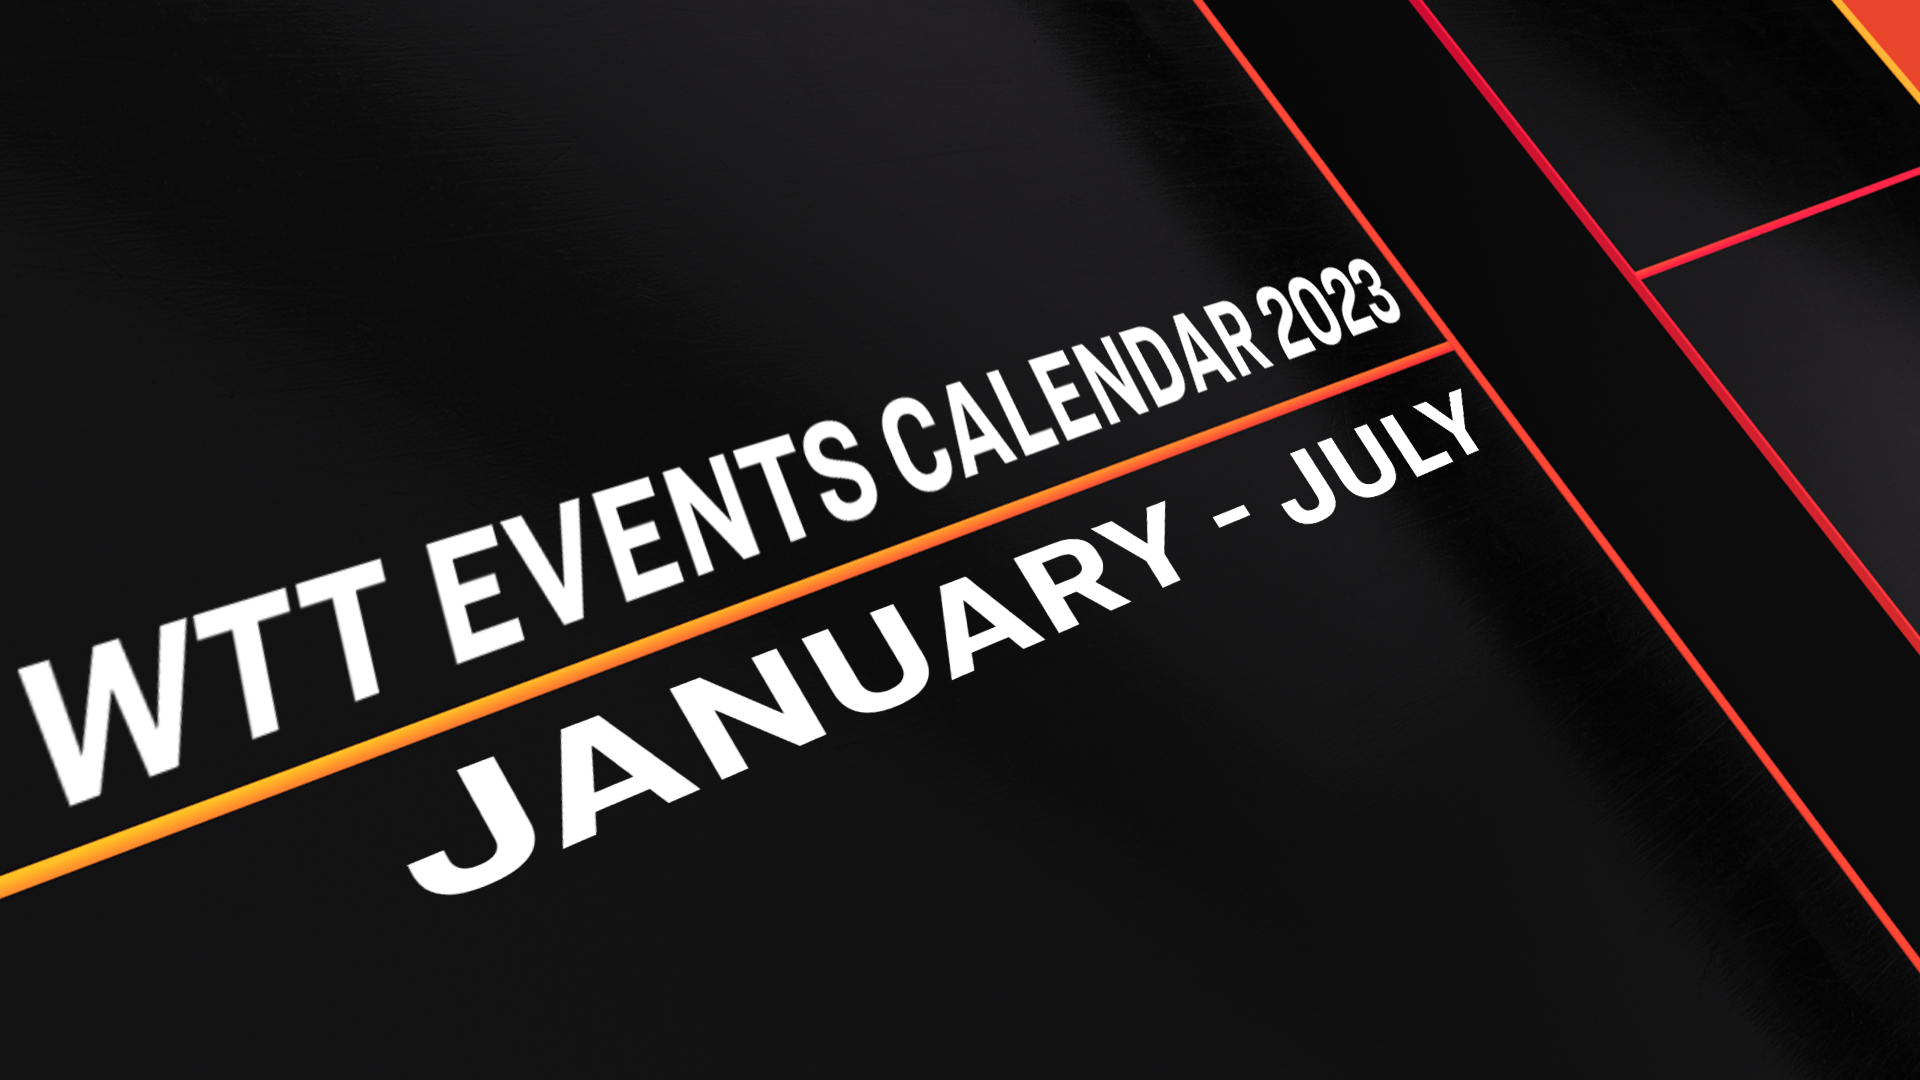 The WTT Series calendar from January through to July has been released ©World Table Tennis